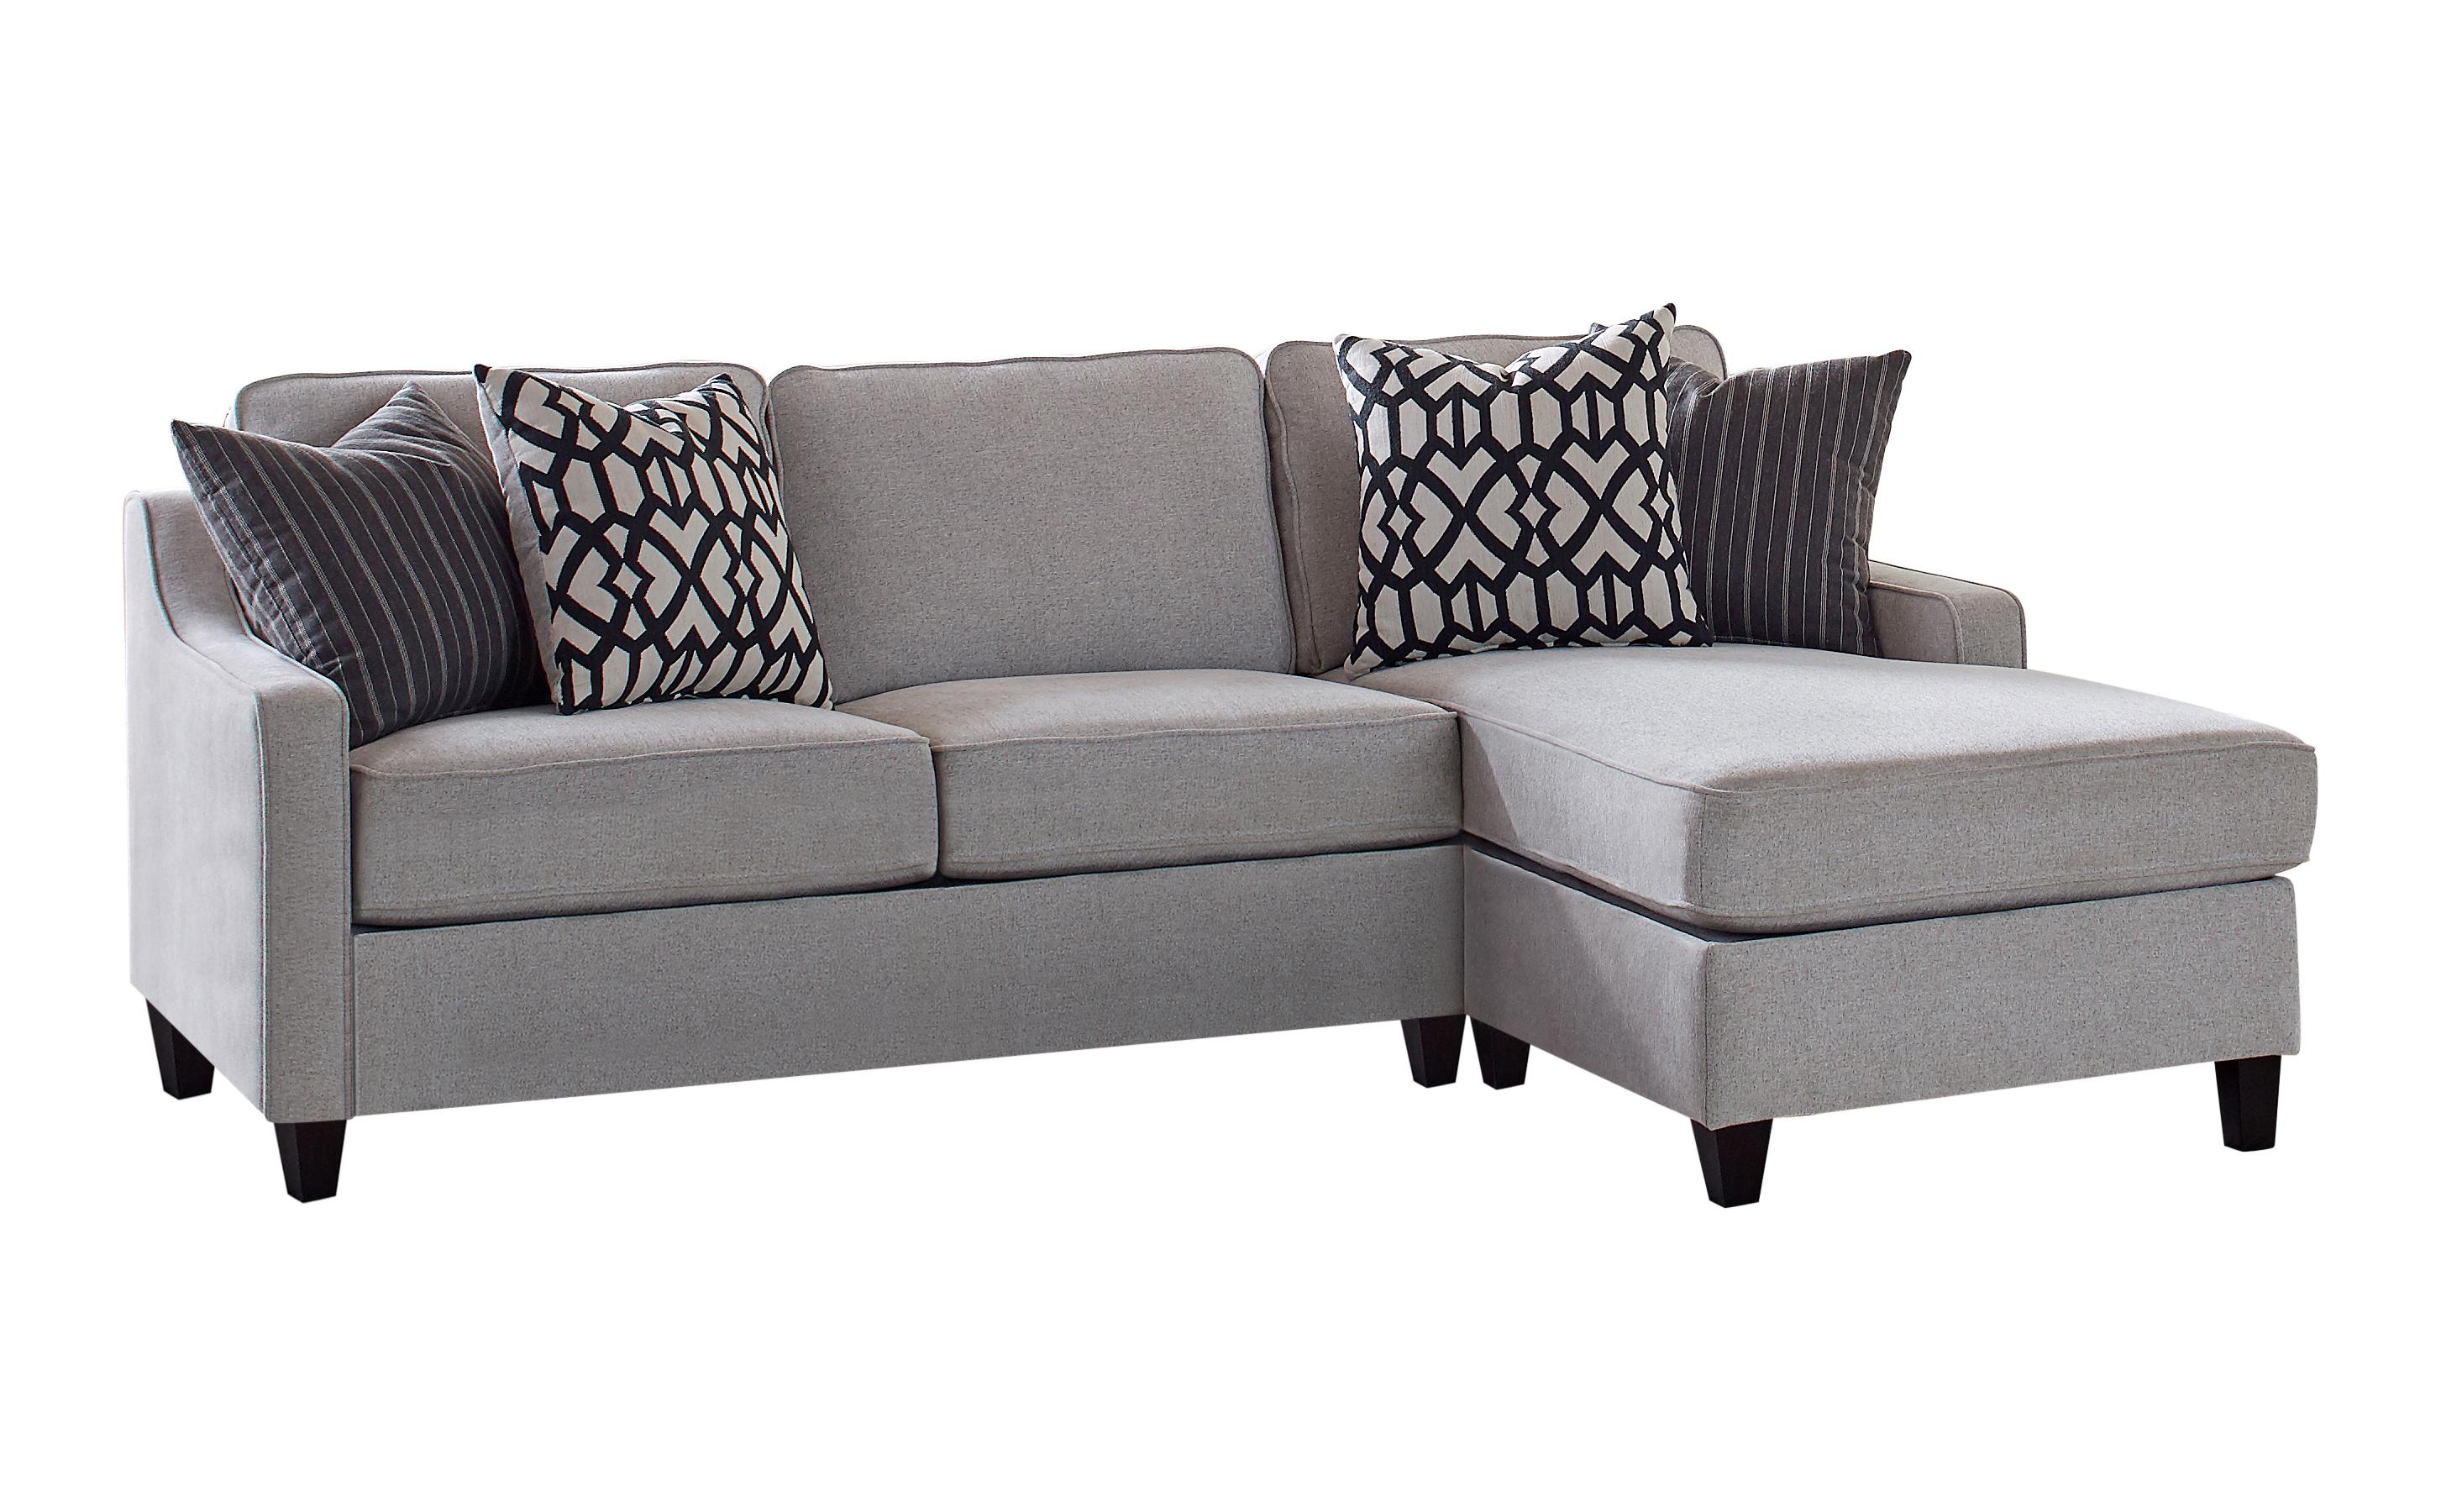 Transitional Sectional 552030 Luanne 552030 in Gray 